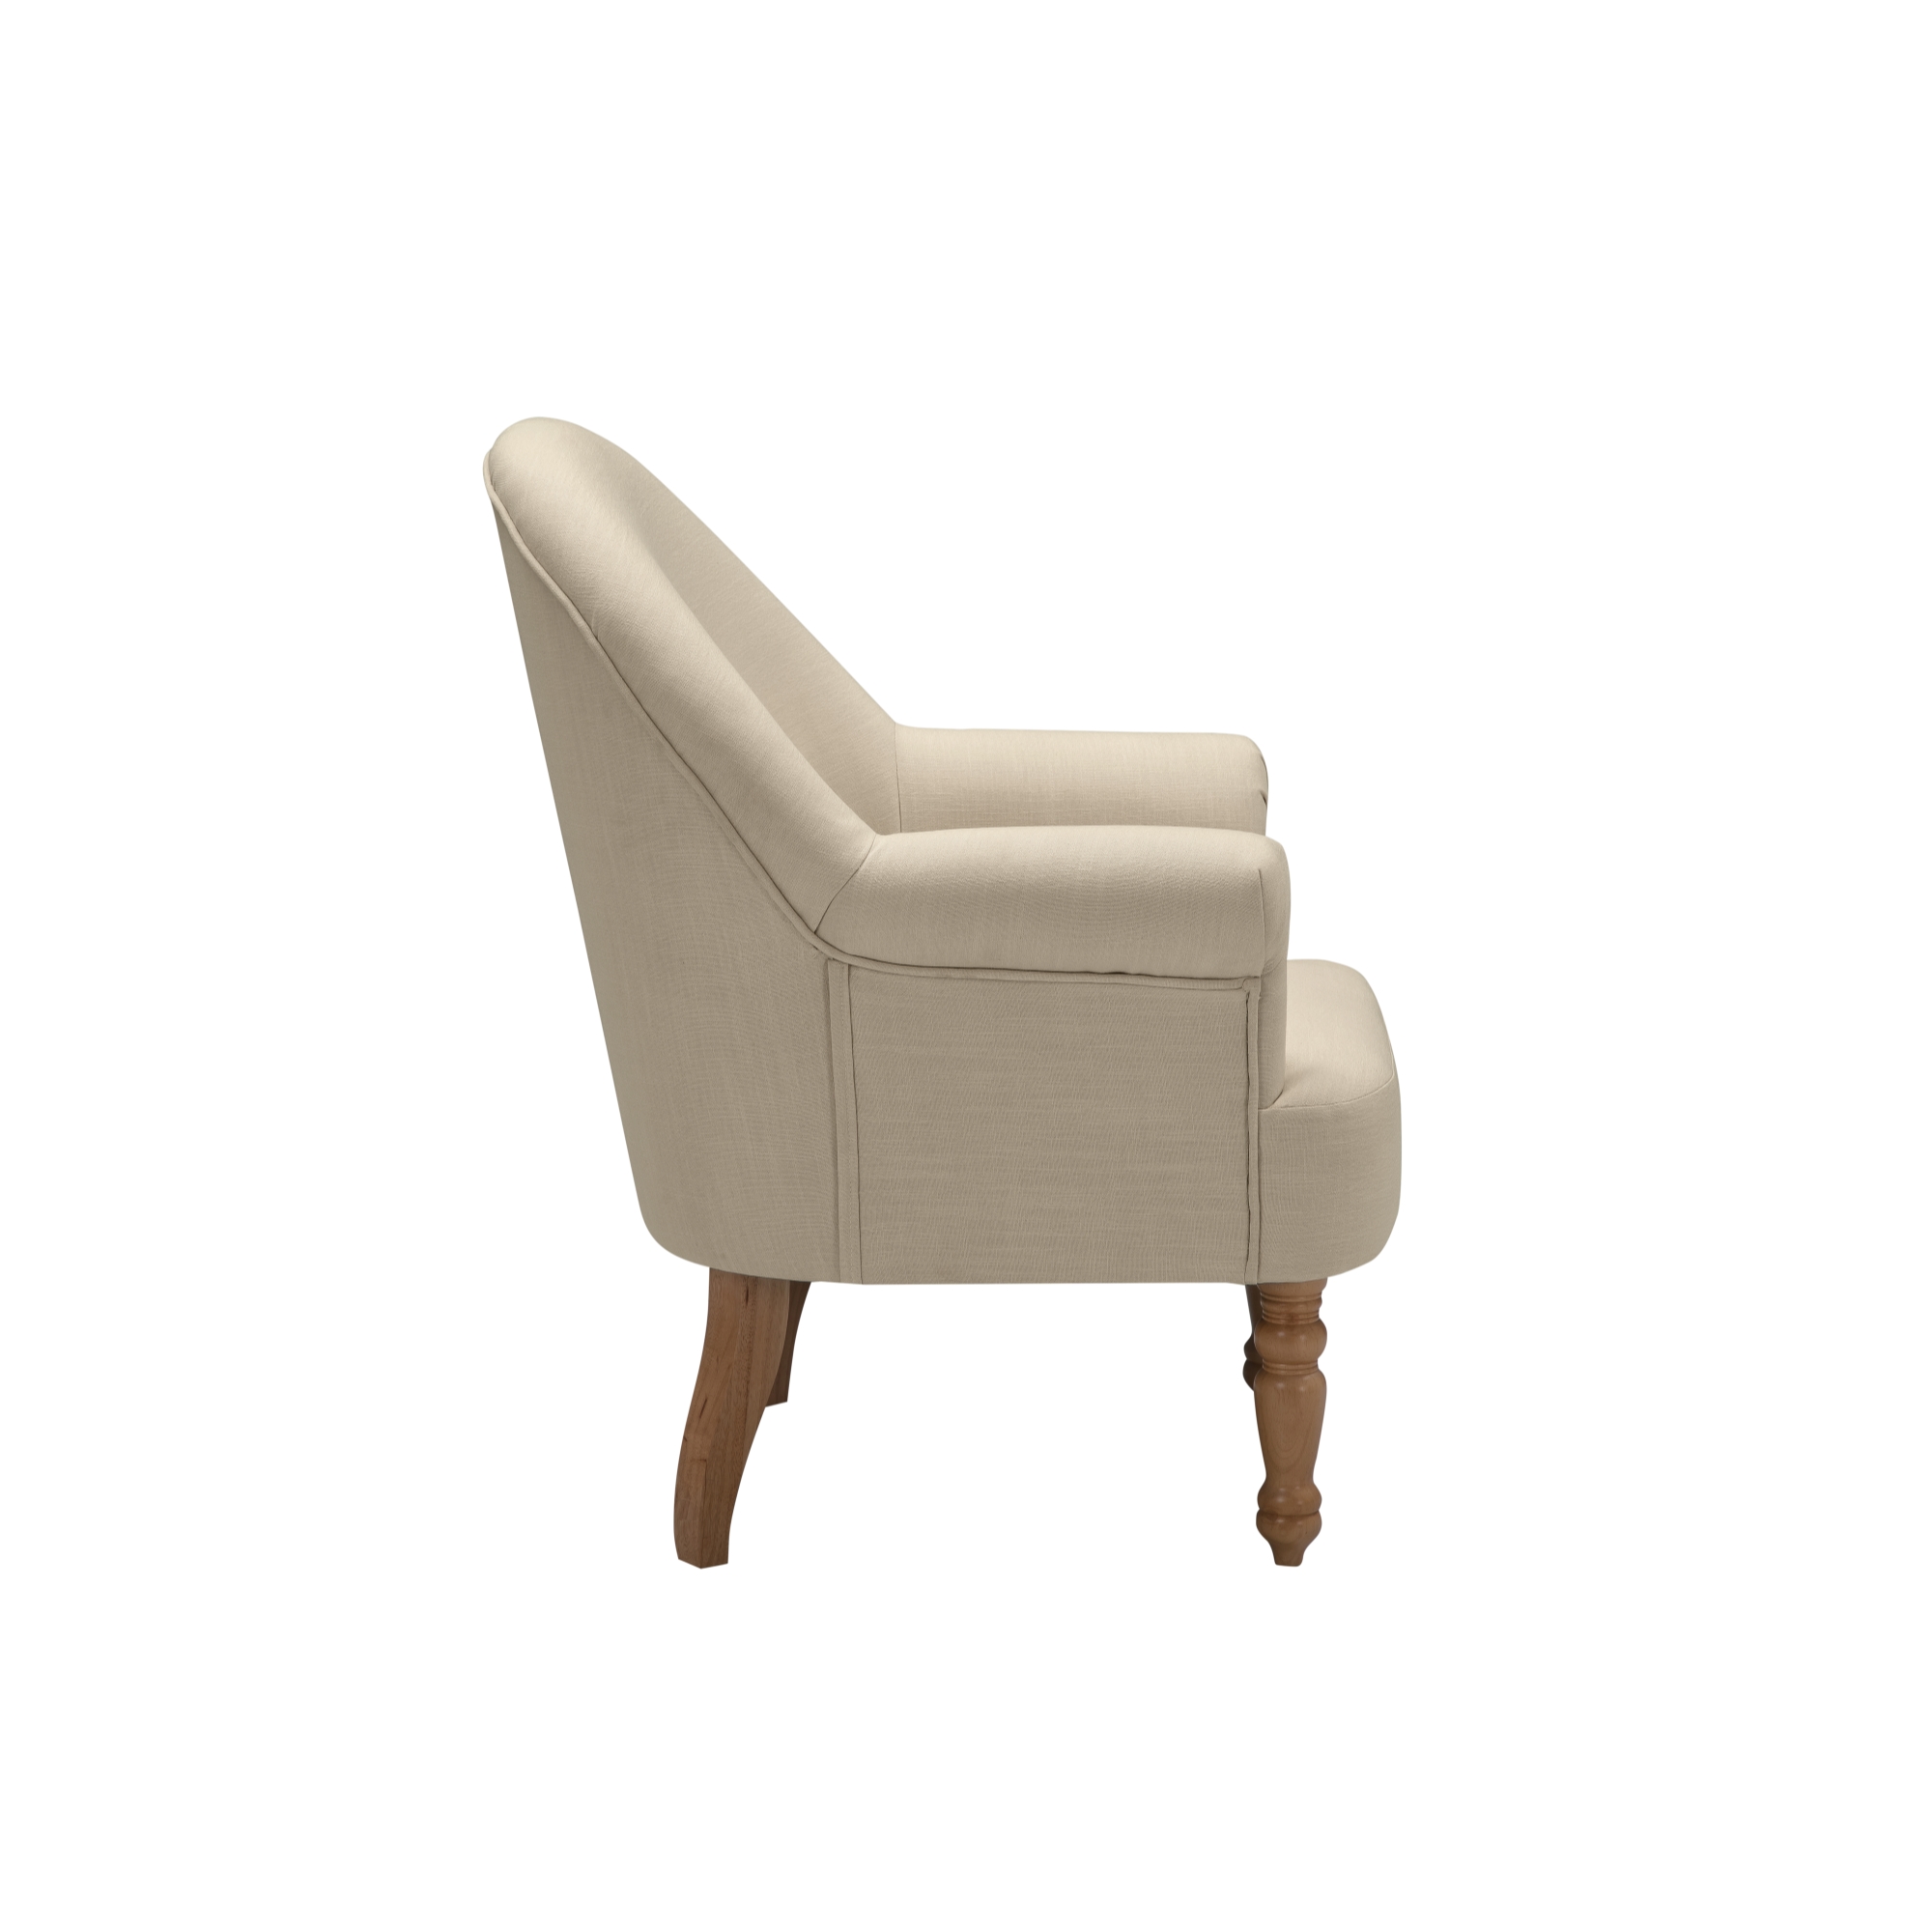 Rustic Manor Ariela Accent Armchair Upholstered Flared arms Curved Back